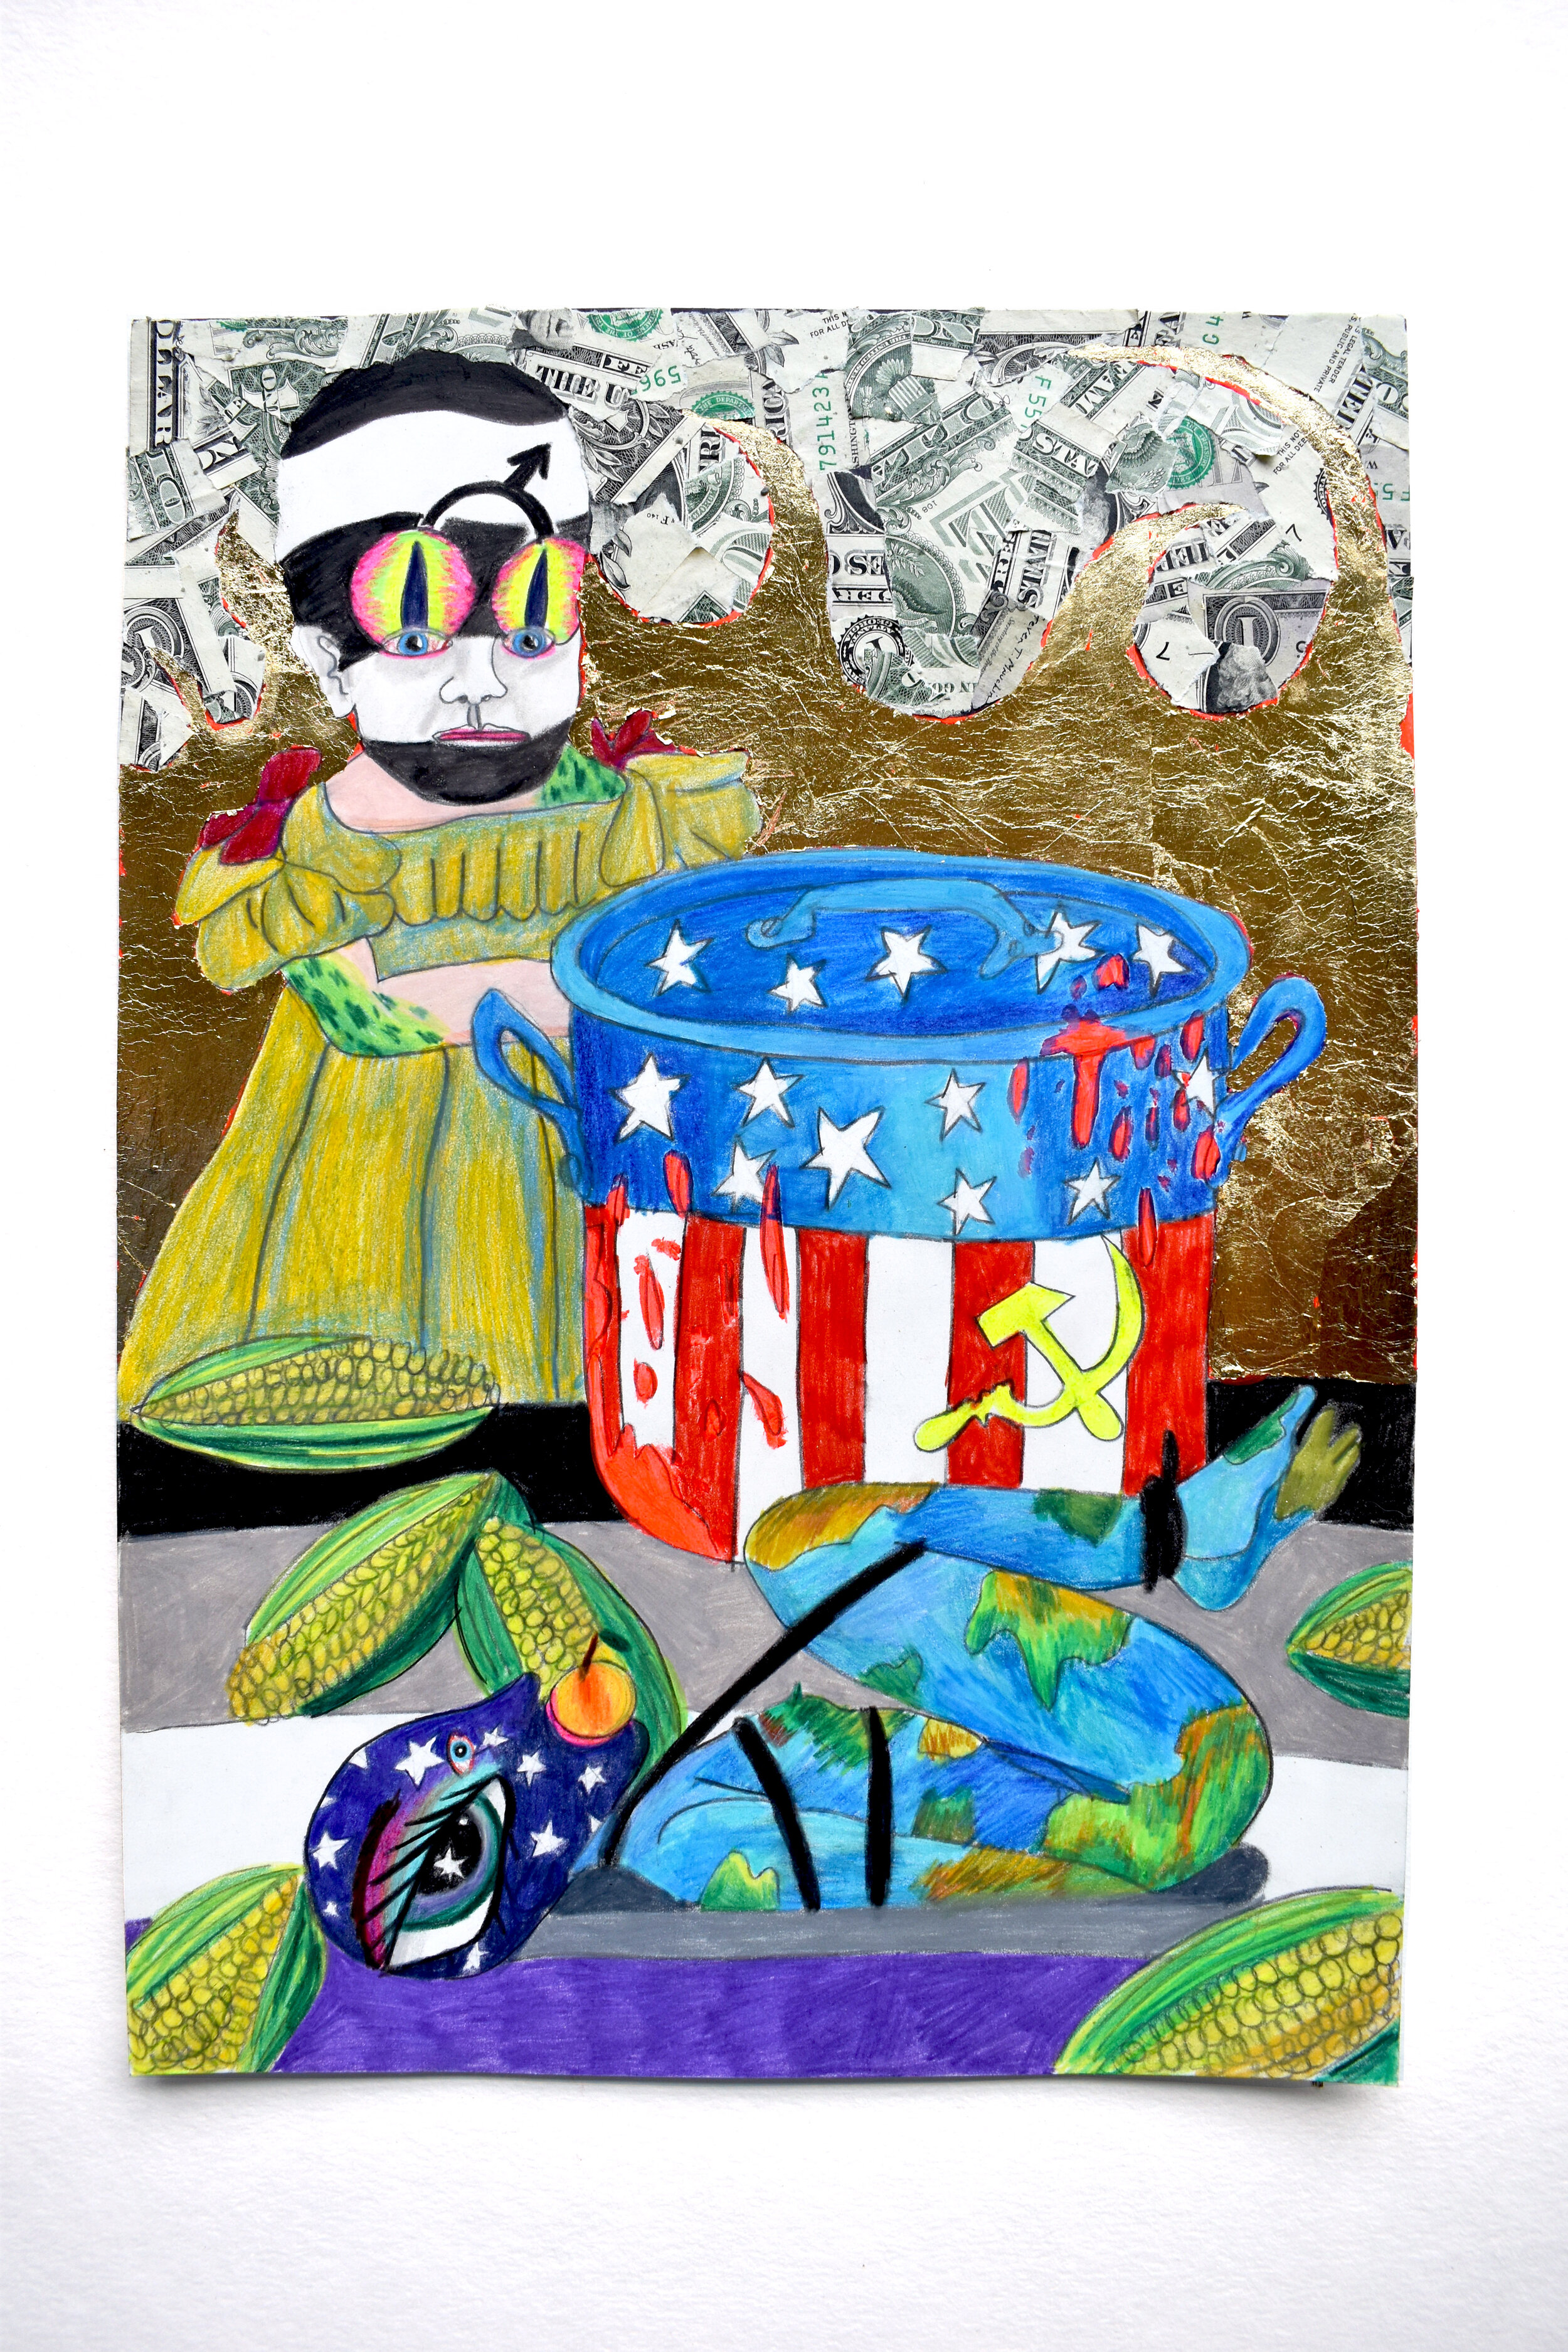   Cannibalism is a Metaphor,  2019  14 x 11 inches (35.56 x 27.94 cm.)  Colored pencil, gold leaf, Modge Podge, and dollar bills on paper  Private collection, New York 